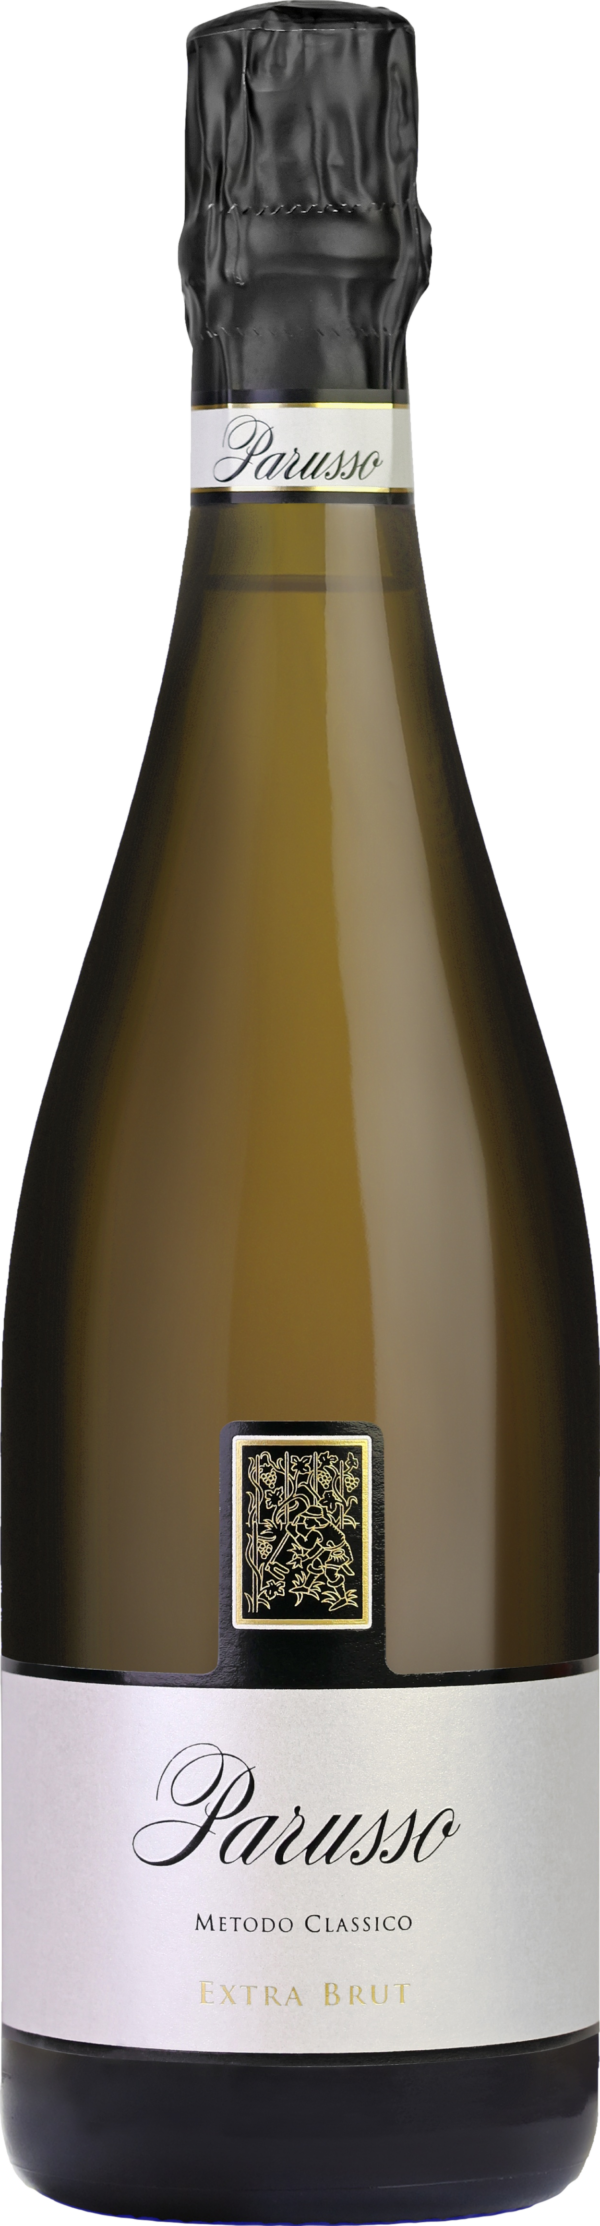 Product image of Parusso Metodo Classico Extra Brut from 8wines